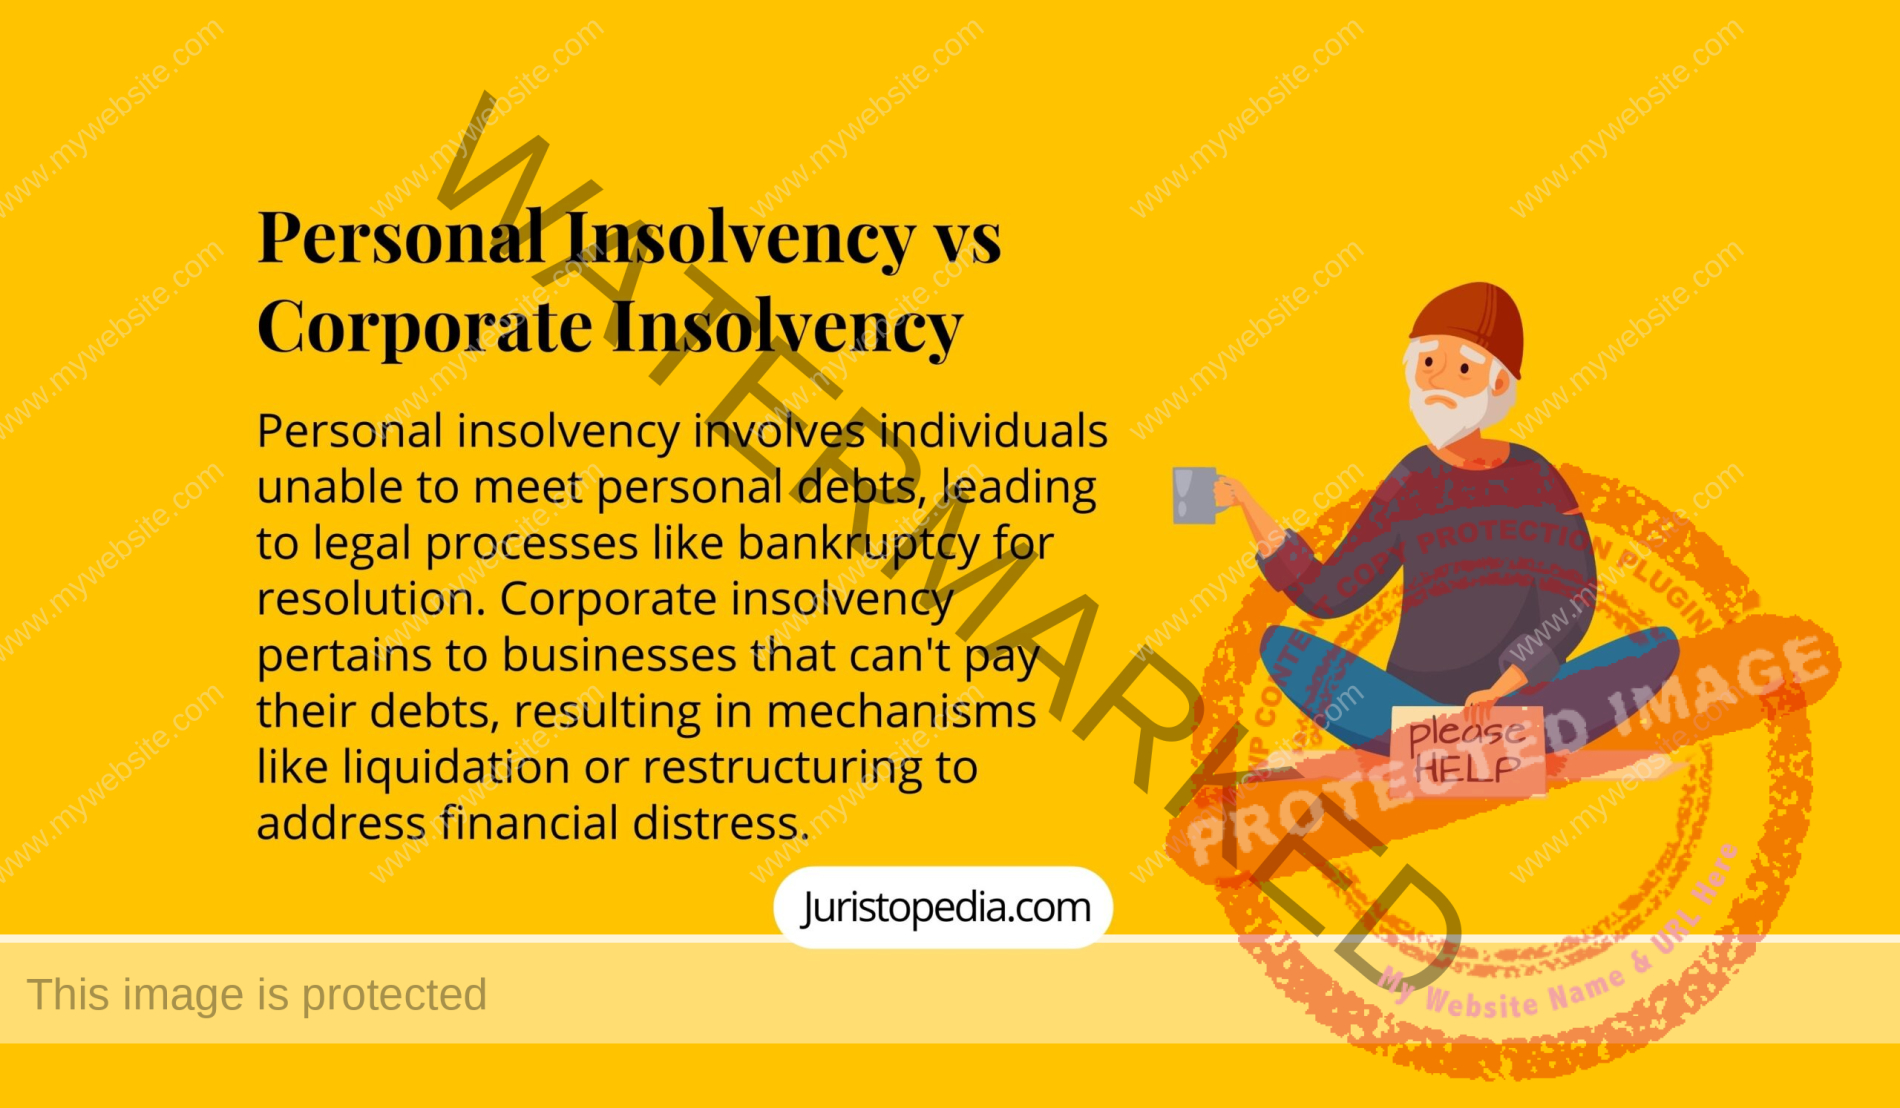 Personal Insolvency vs Corporate Insolvency - IVA's - CVA's - voluntary arrangement - bankrupty - insolvency law - what is insolvency - UNCITRAL model law insolvency - corporate rescue